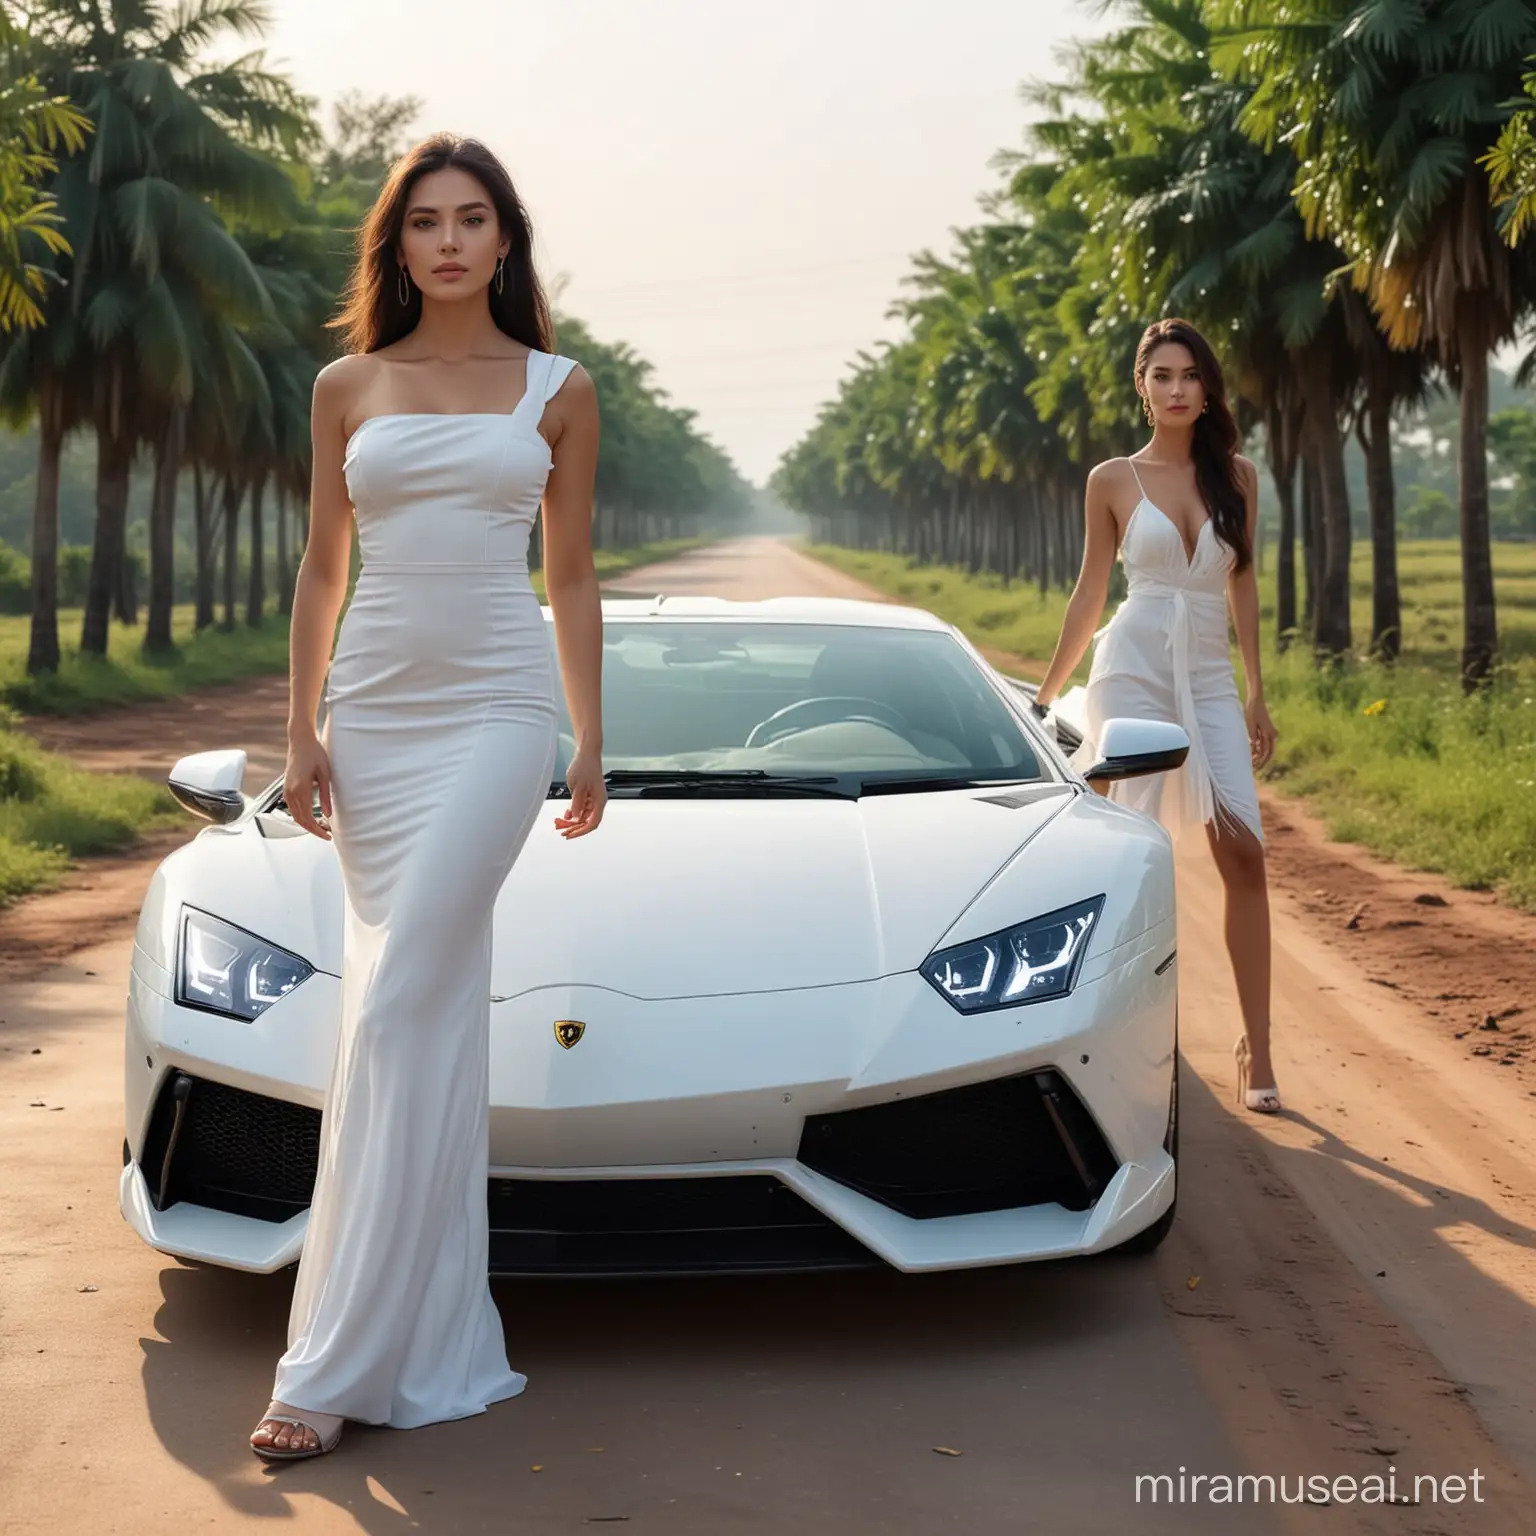 real beautiful gorgeous woman, posing next to her Lamborghini, in white dress and high heels in Cambodia street countryside, image UHD ultra detailed, photo hyper realistic, 8K 